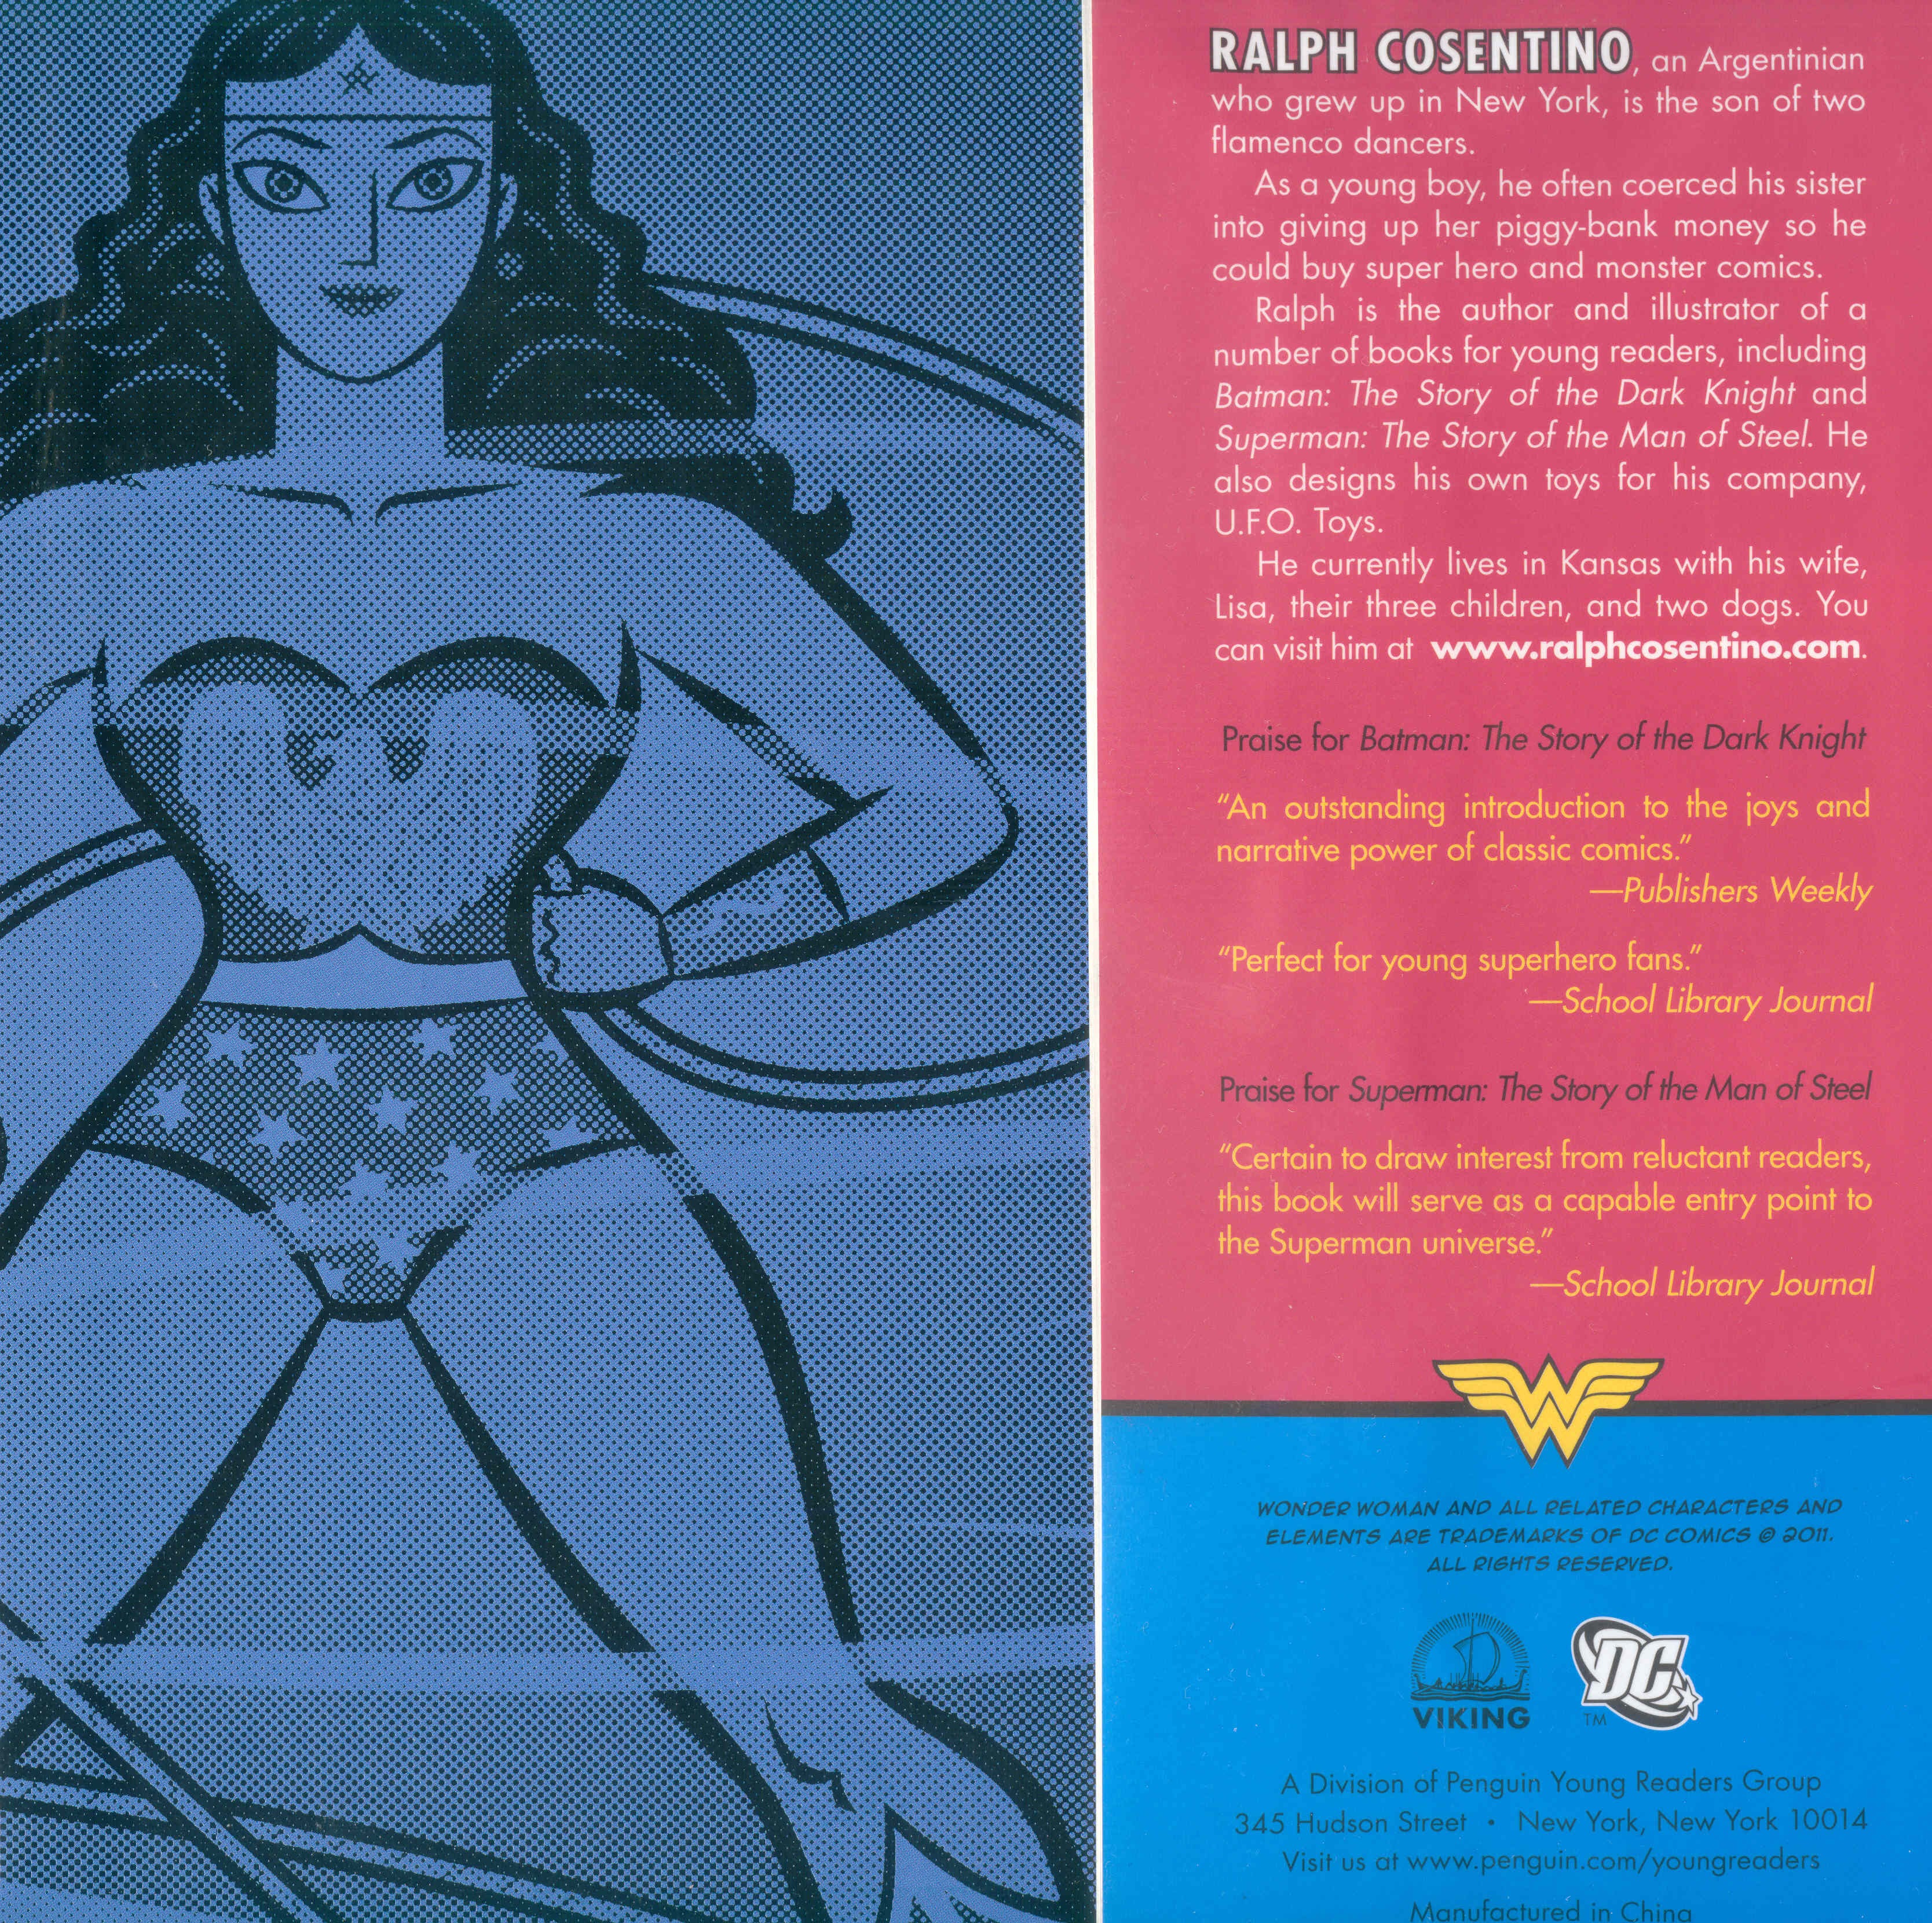 Read online Wonder Woman: The Story of the Amazon Princess comic -  Issue # Full - 39